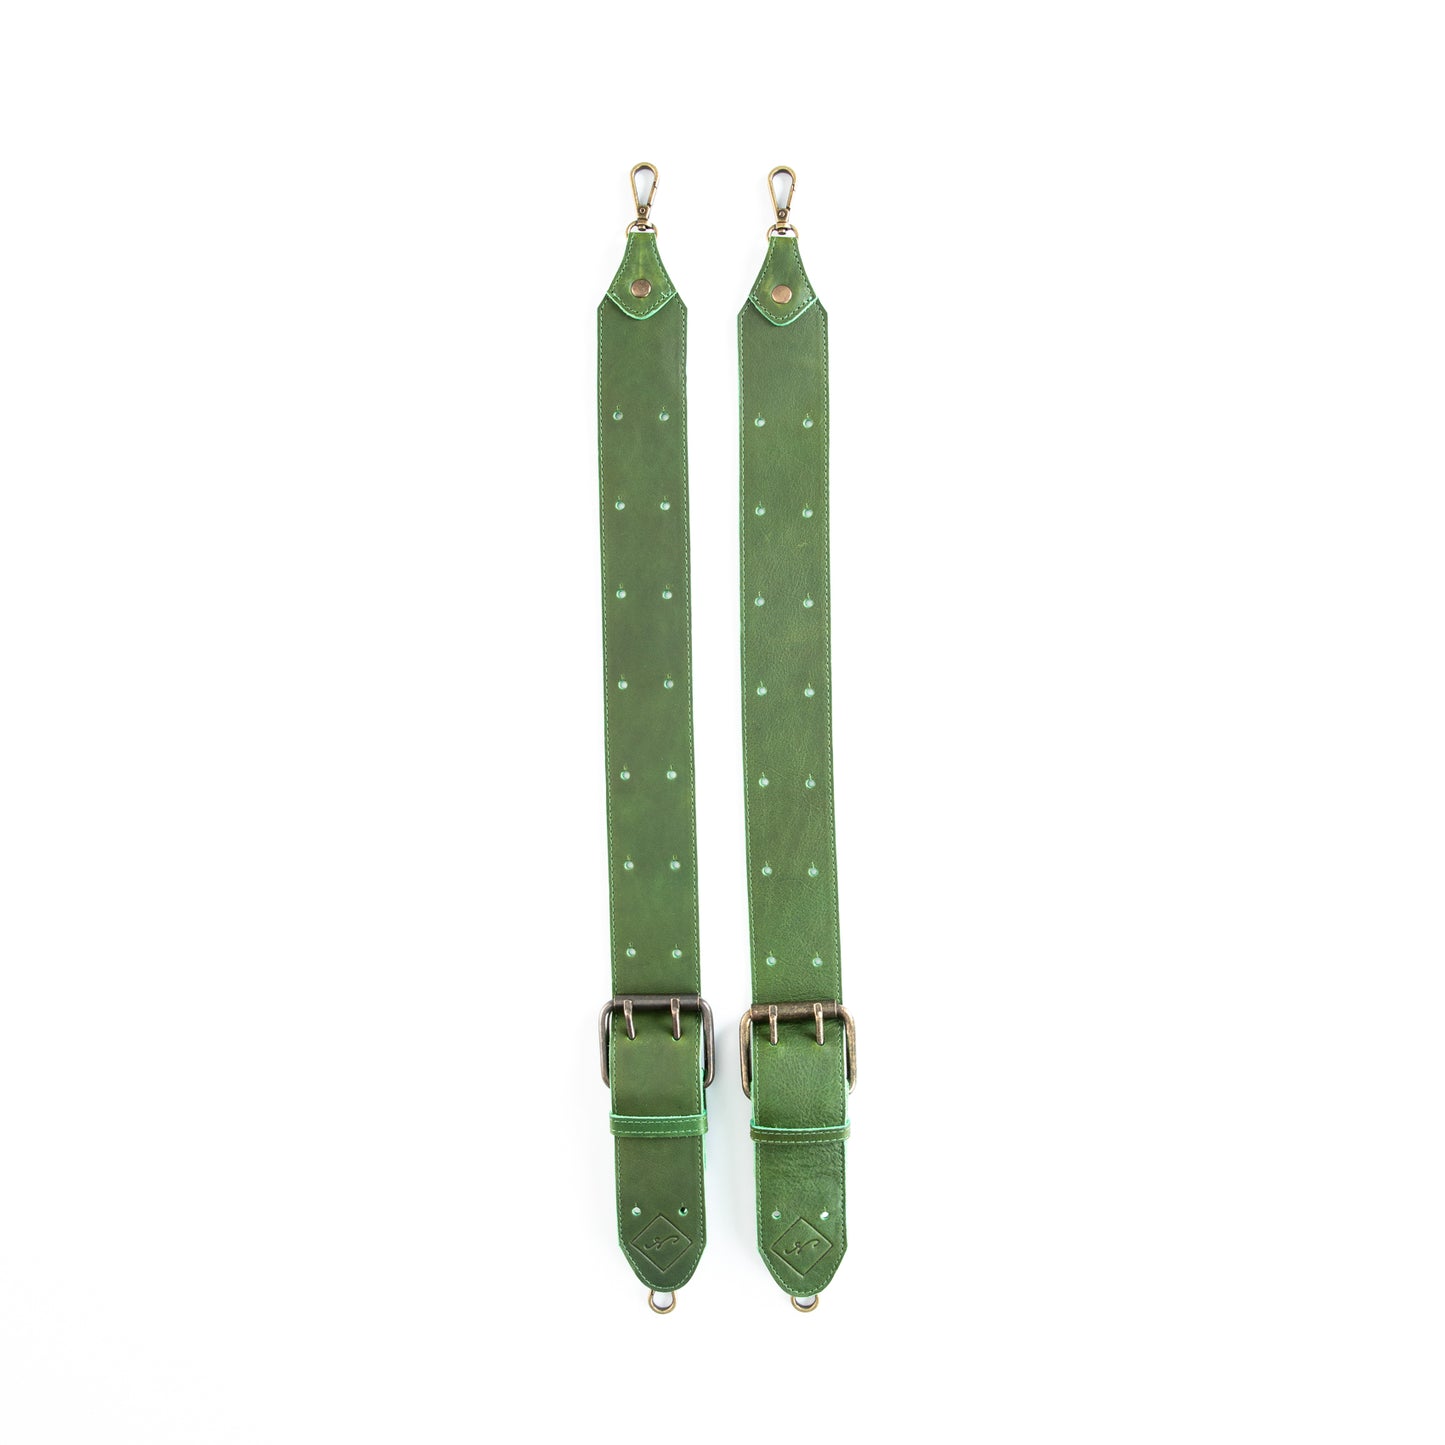 CONVERTIBLE BACKPACK STRAP SET - EMERALD LEATHER